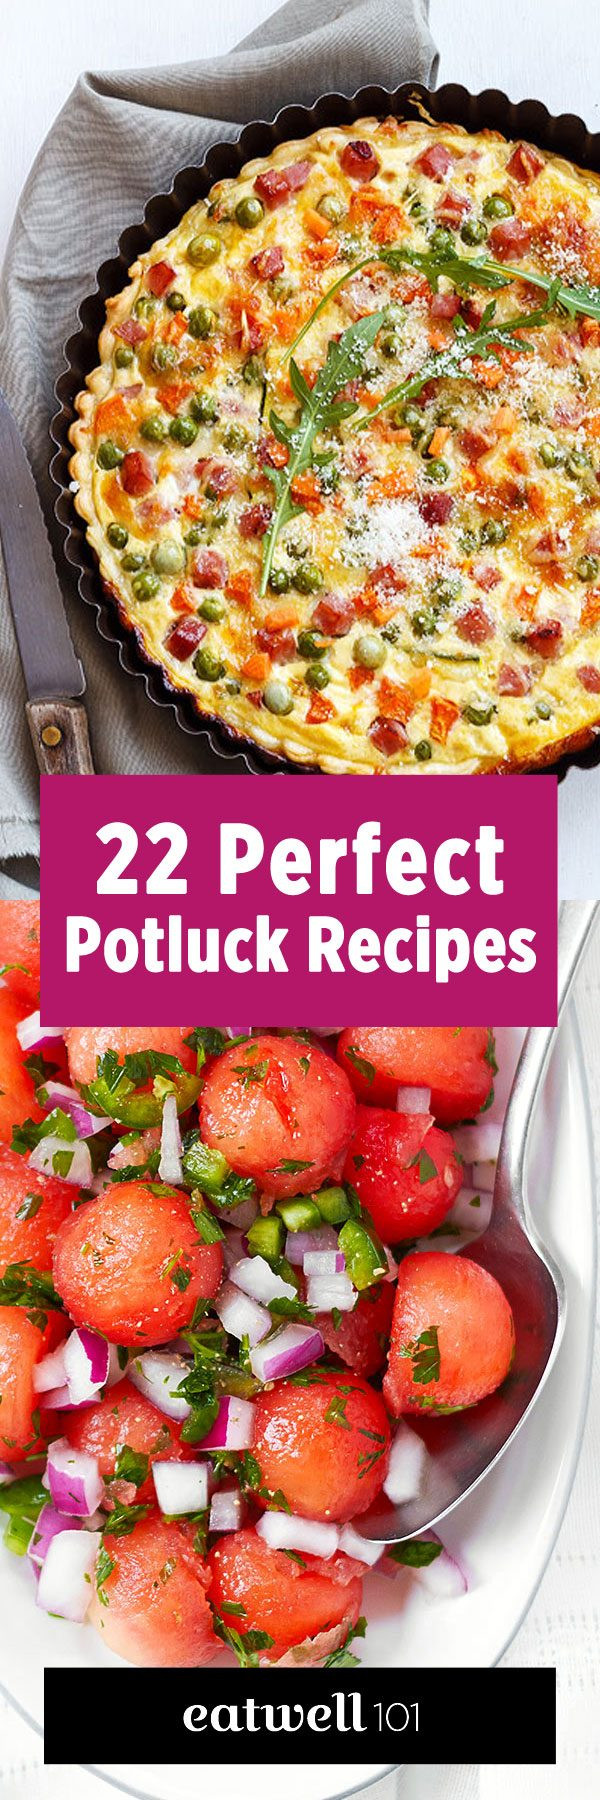 Food Ideas To Bring To A Party
 What to bring to a potluck 23 Best Dishes Ideas Perfect